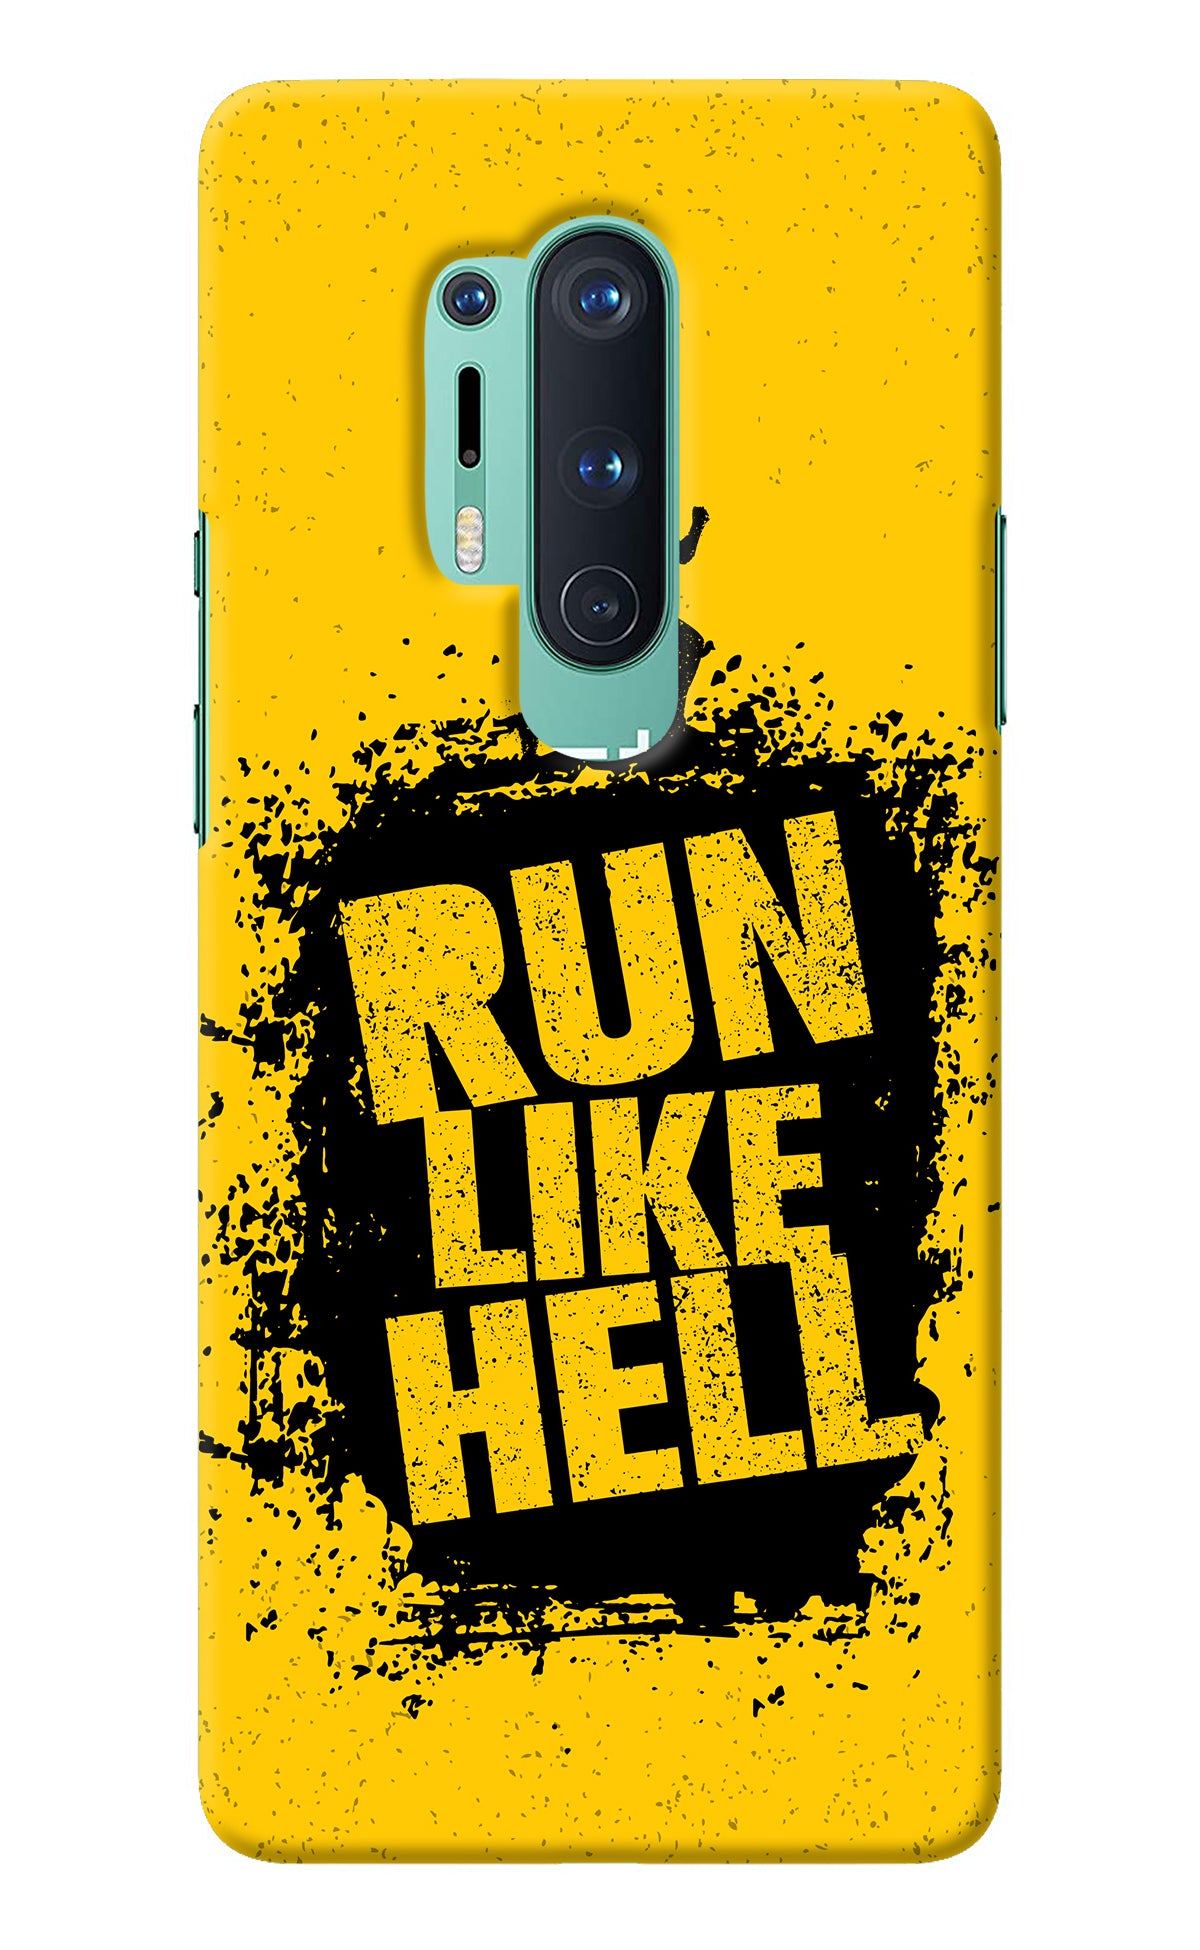 Run Like Hell Oneplus 8 Pro Back Cover